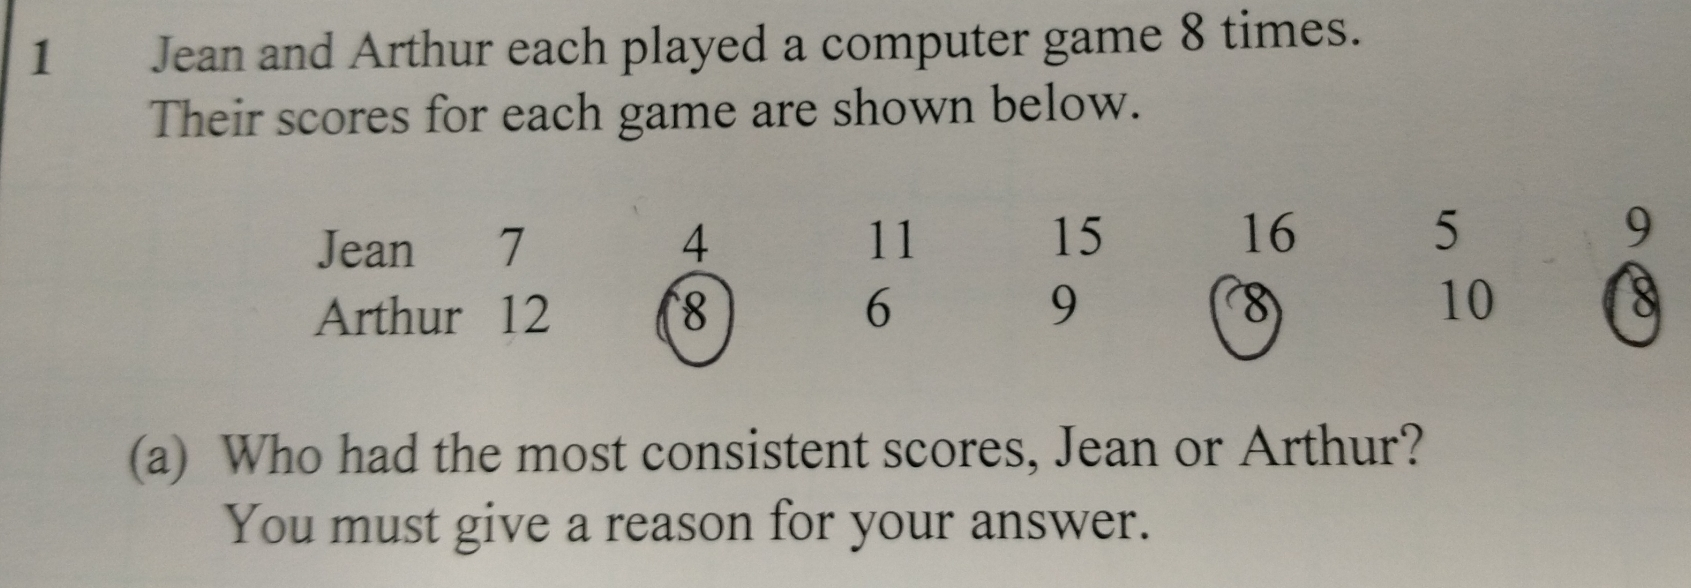 1 Jean and Arthur each played a computer game 8 times. Their scores for each game are shown below. Jean 7411151659 Arthur 128698108 a Who had the most consistent scores, Jean or Arthur? You must give a reason for your answer.